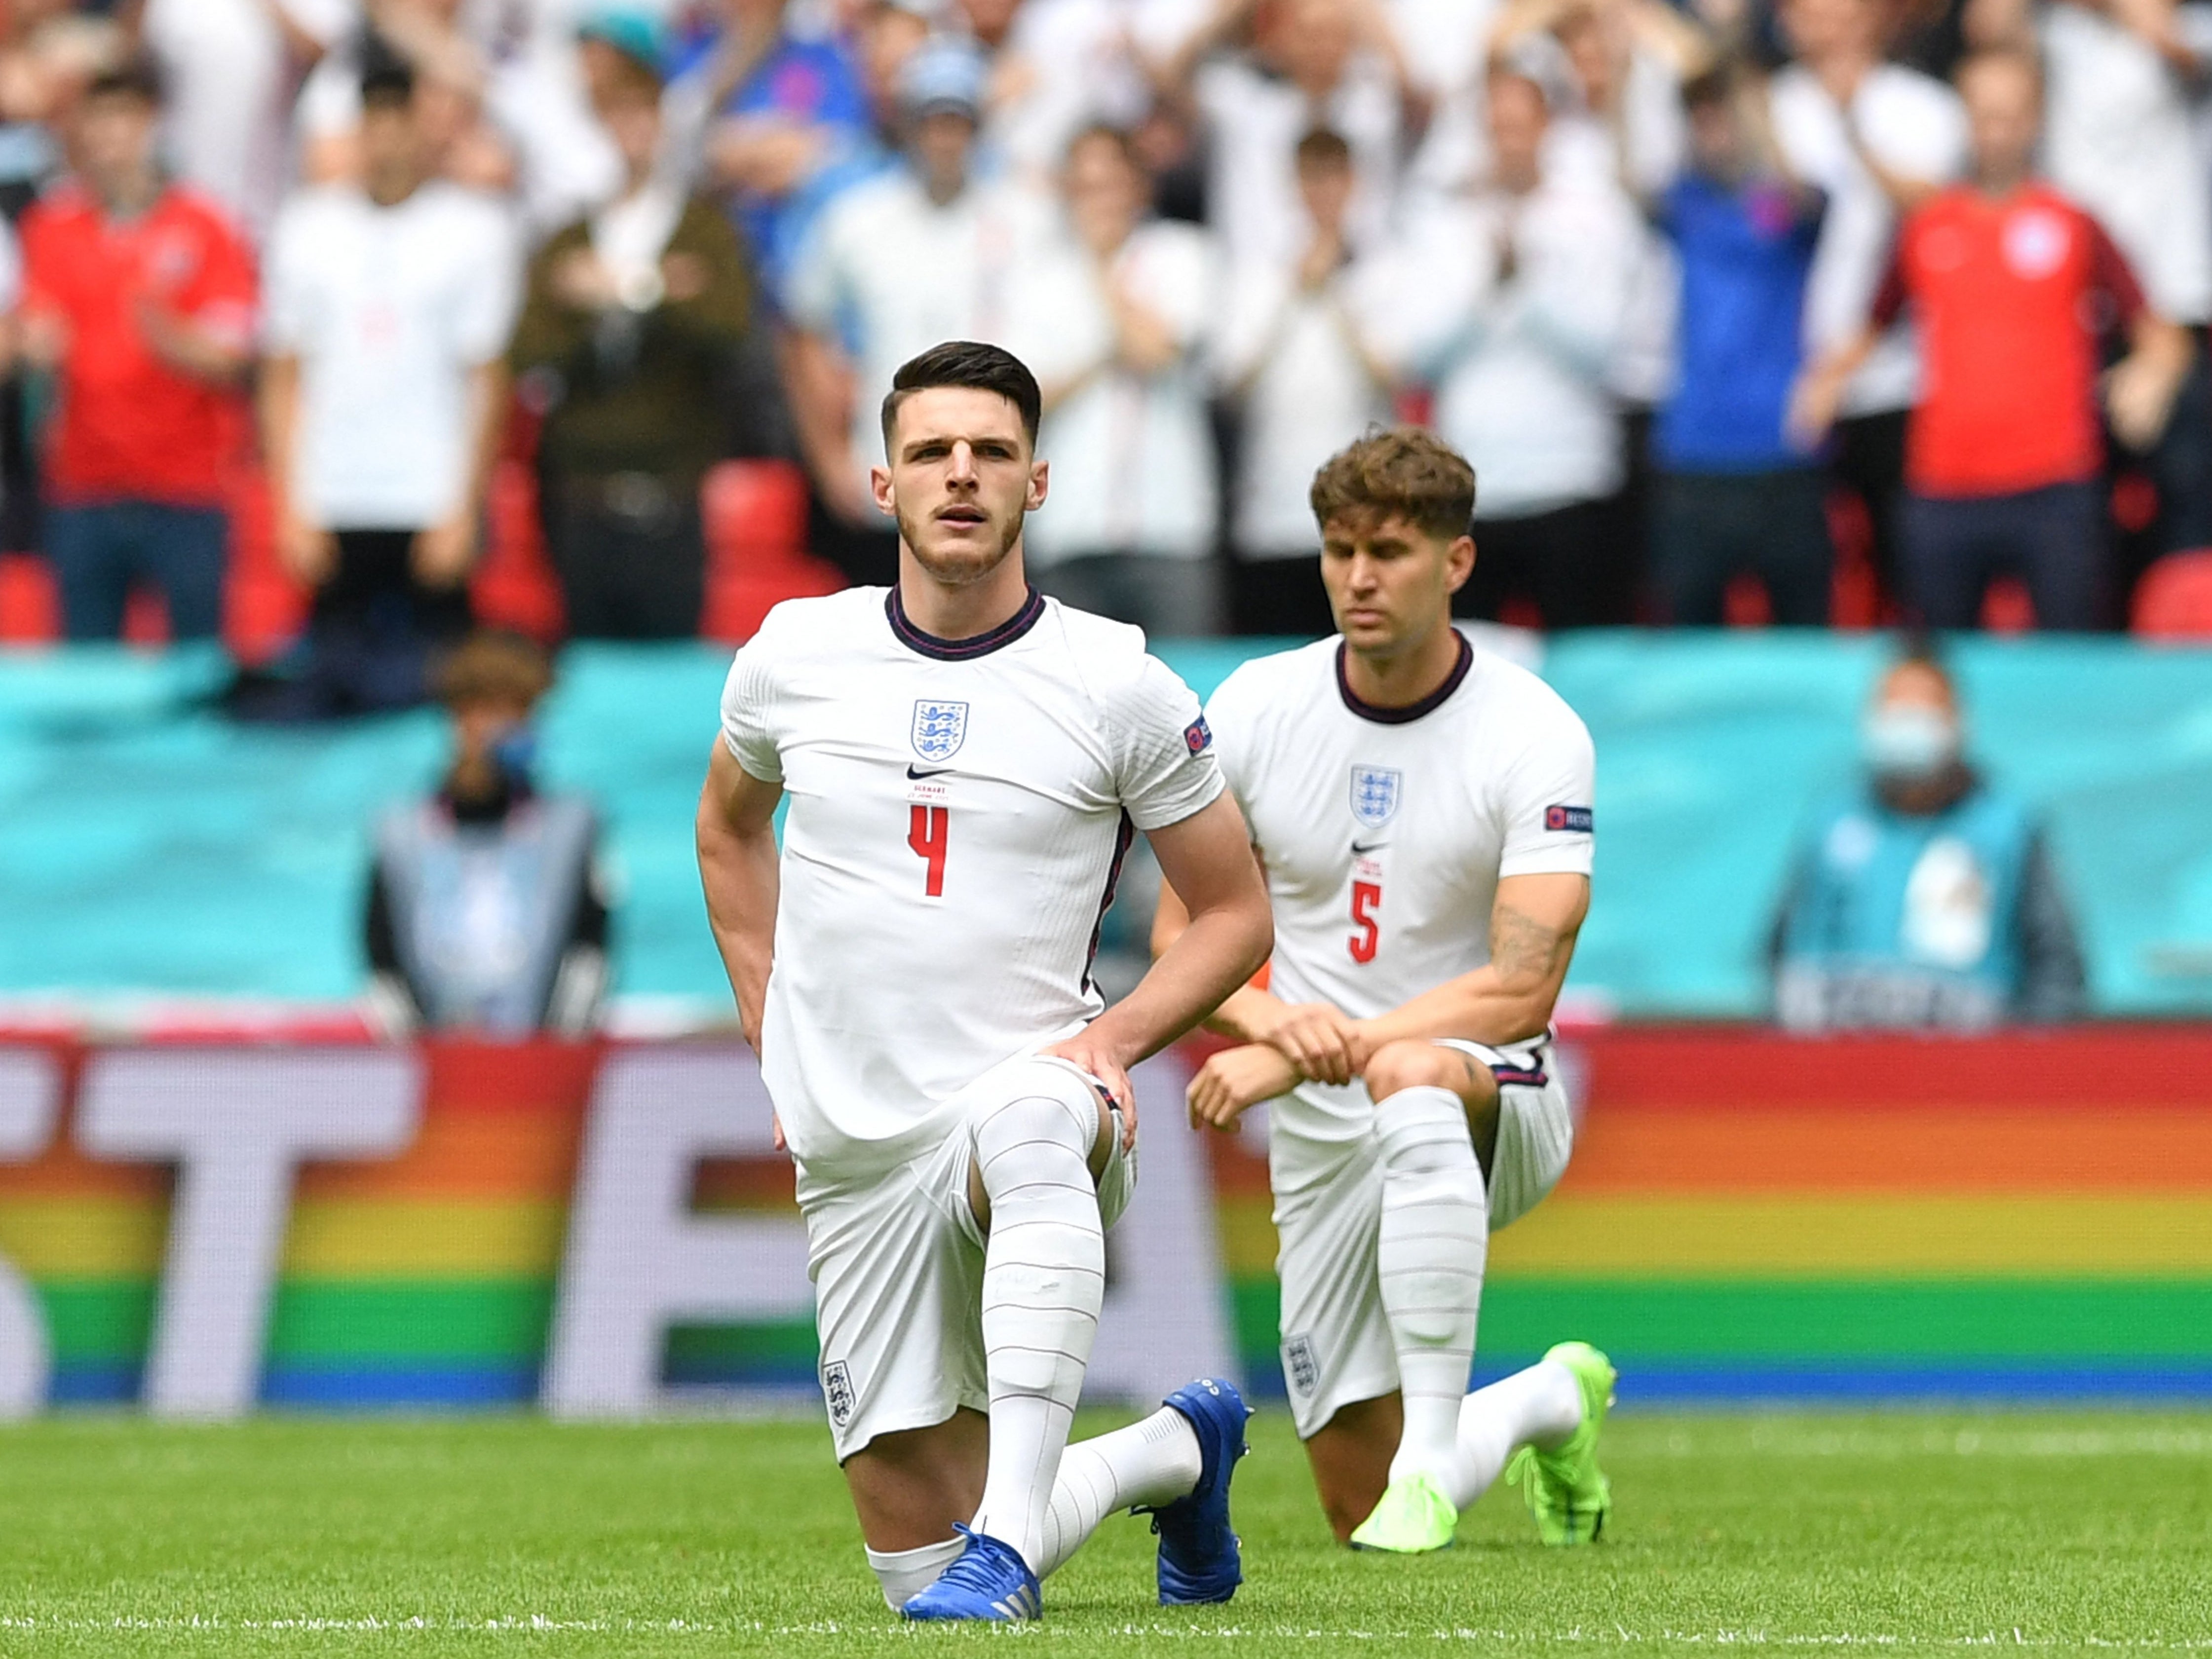 Declan Rice and John Stones take the knee while representing England